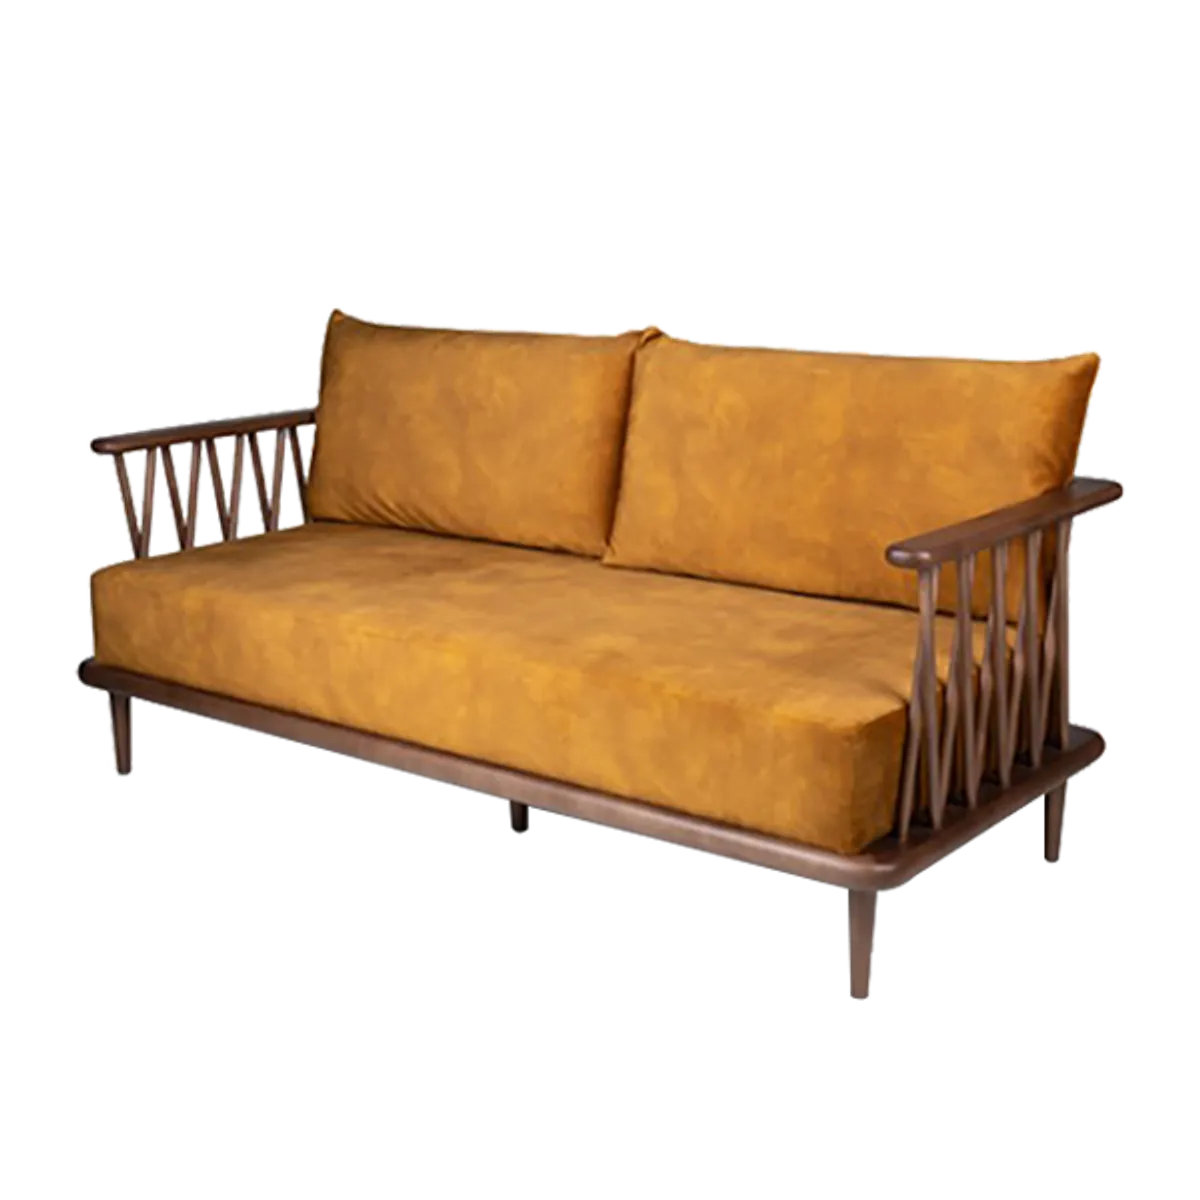 Web Nature Sofa Wooden Framed Furniture By Insideoutcontracts